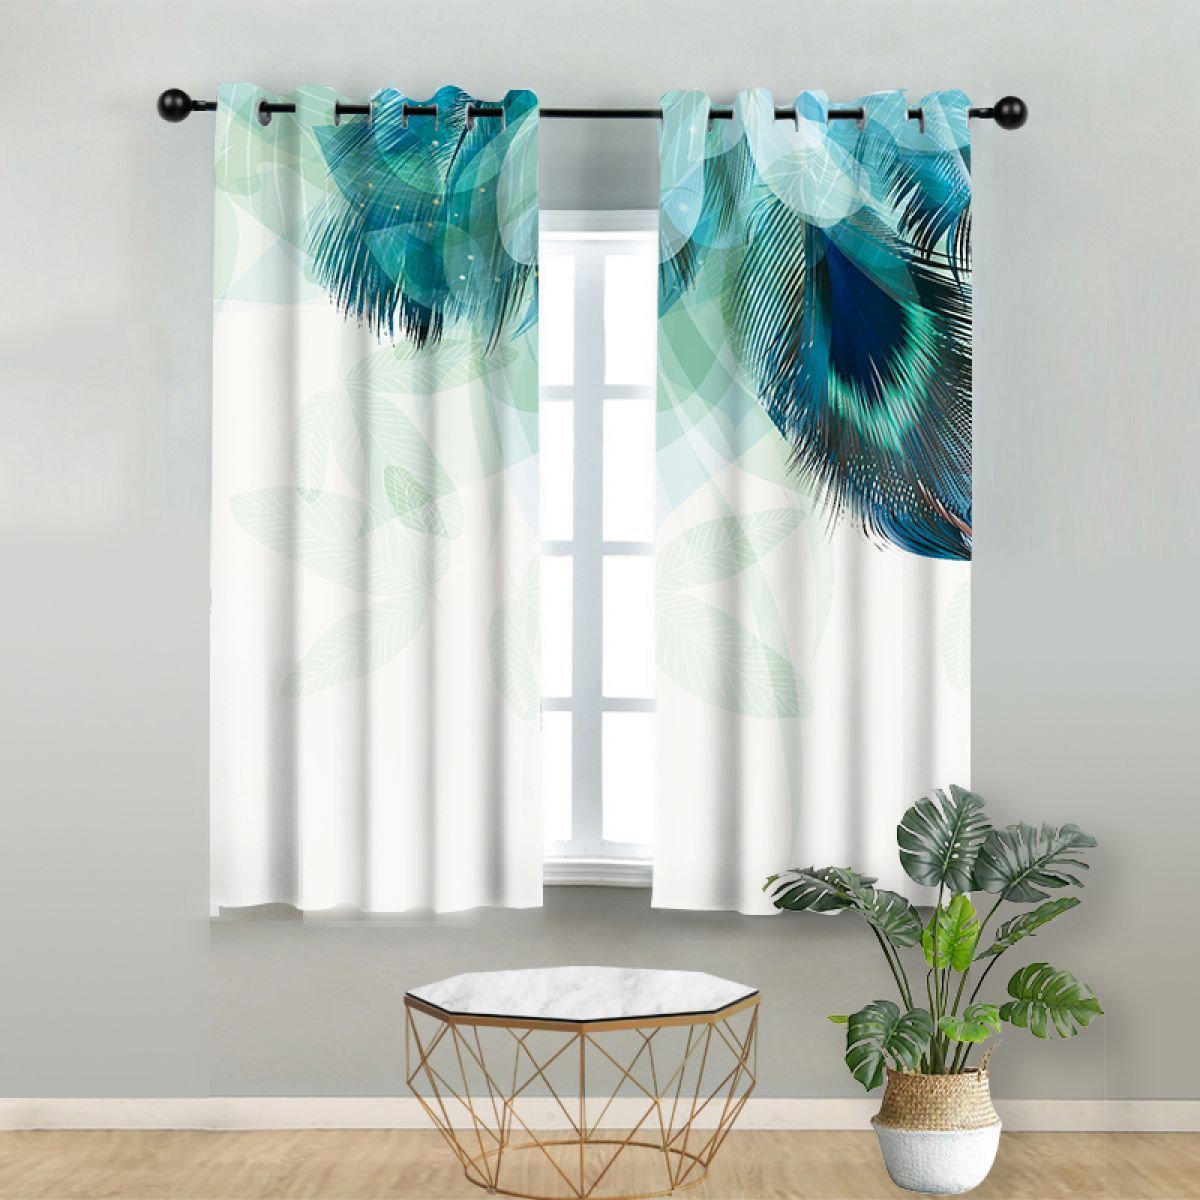 Green Peacock Feather Printed Window Curtain Home Decor